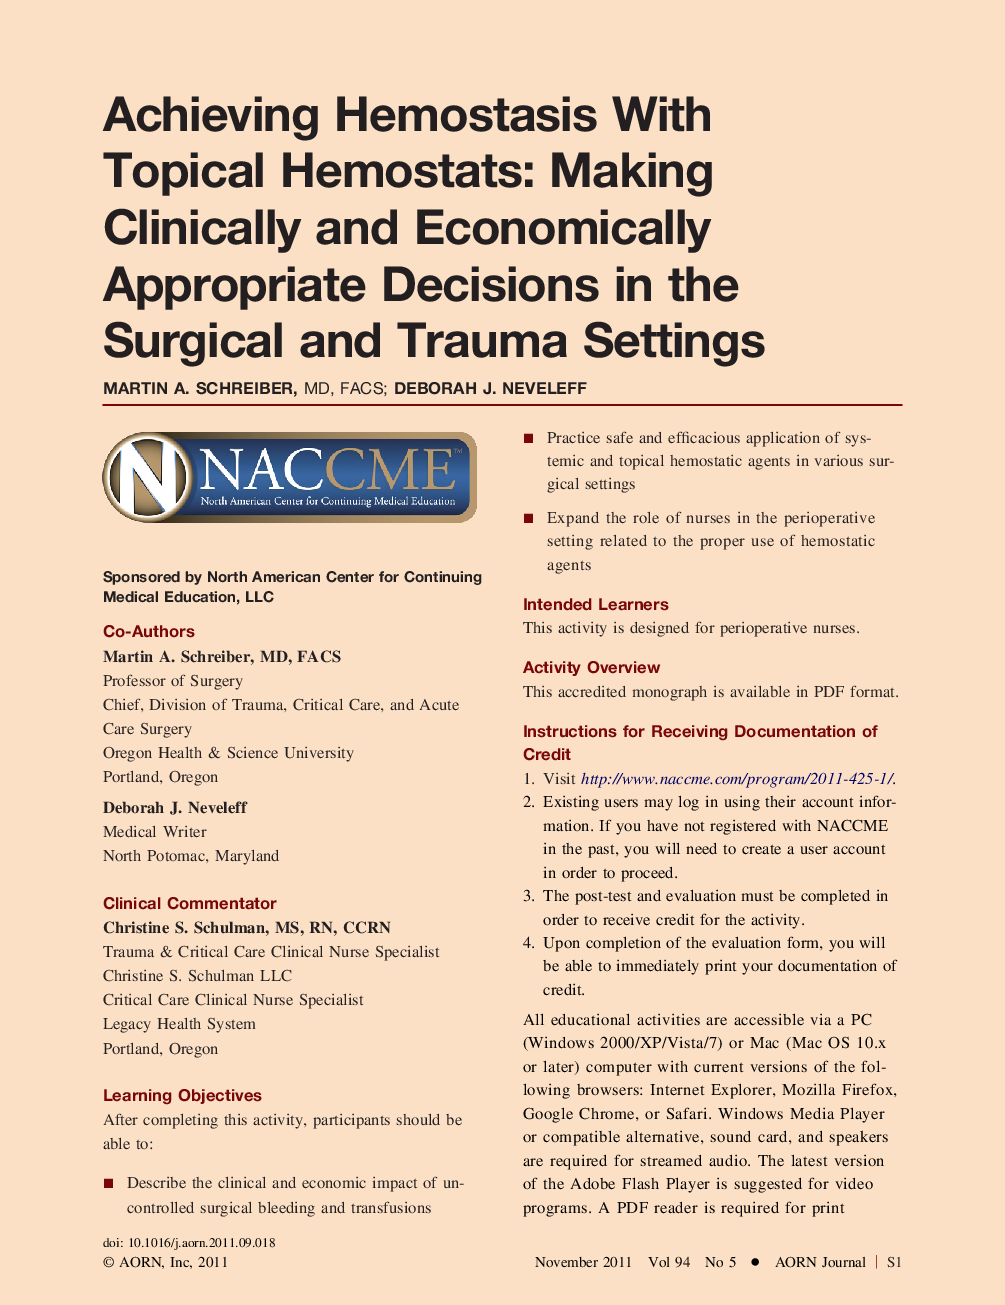 Achieving Hemostasis With Topical Hemostats: Making Clinically and Economically Appropriate Decisions in the Surgical and Trauma Settings